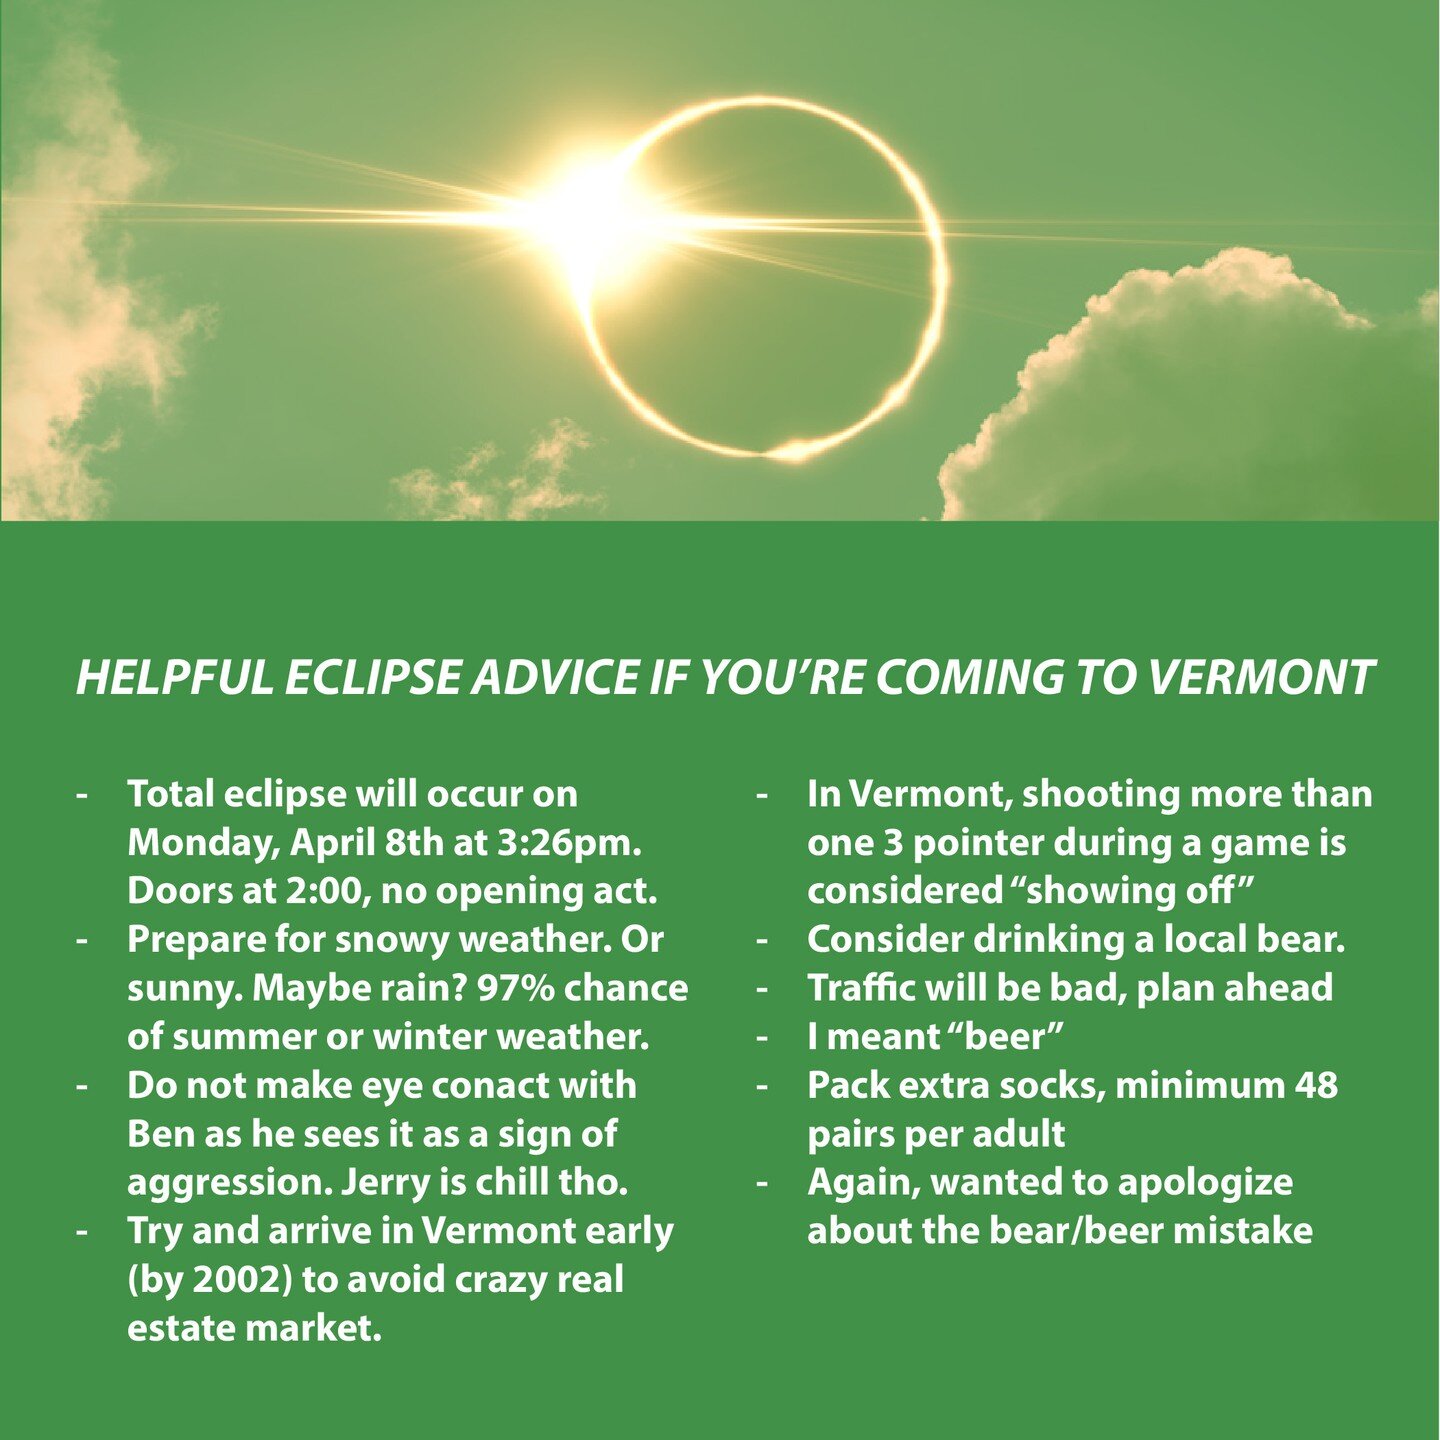 Lots of people coming to #Vermont for the #EclipseSolar so here's some helpful planning advice if you're one of them (the people coming to Vermont)